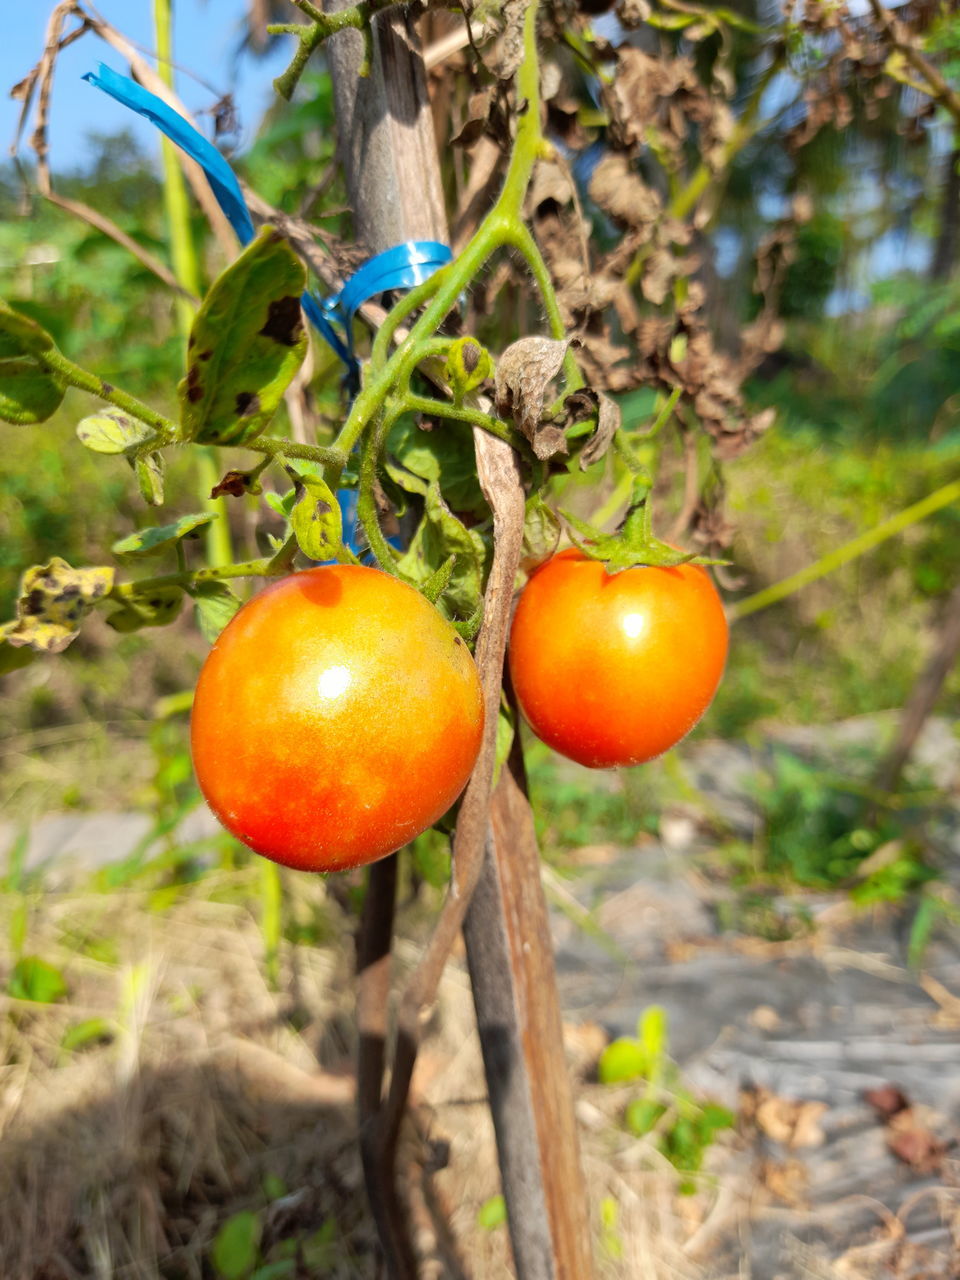 CLOSE-UP OF TOMATOES GROWING ON TREE